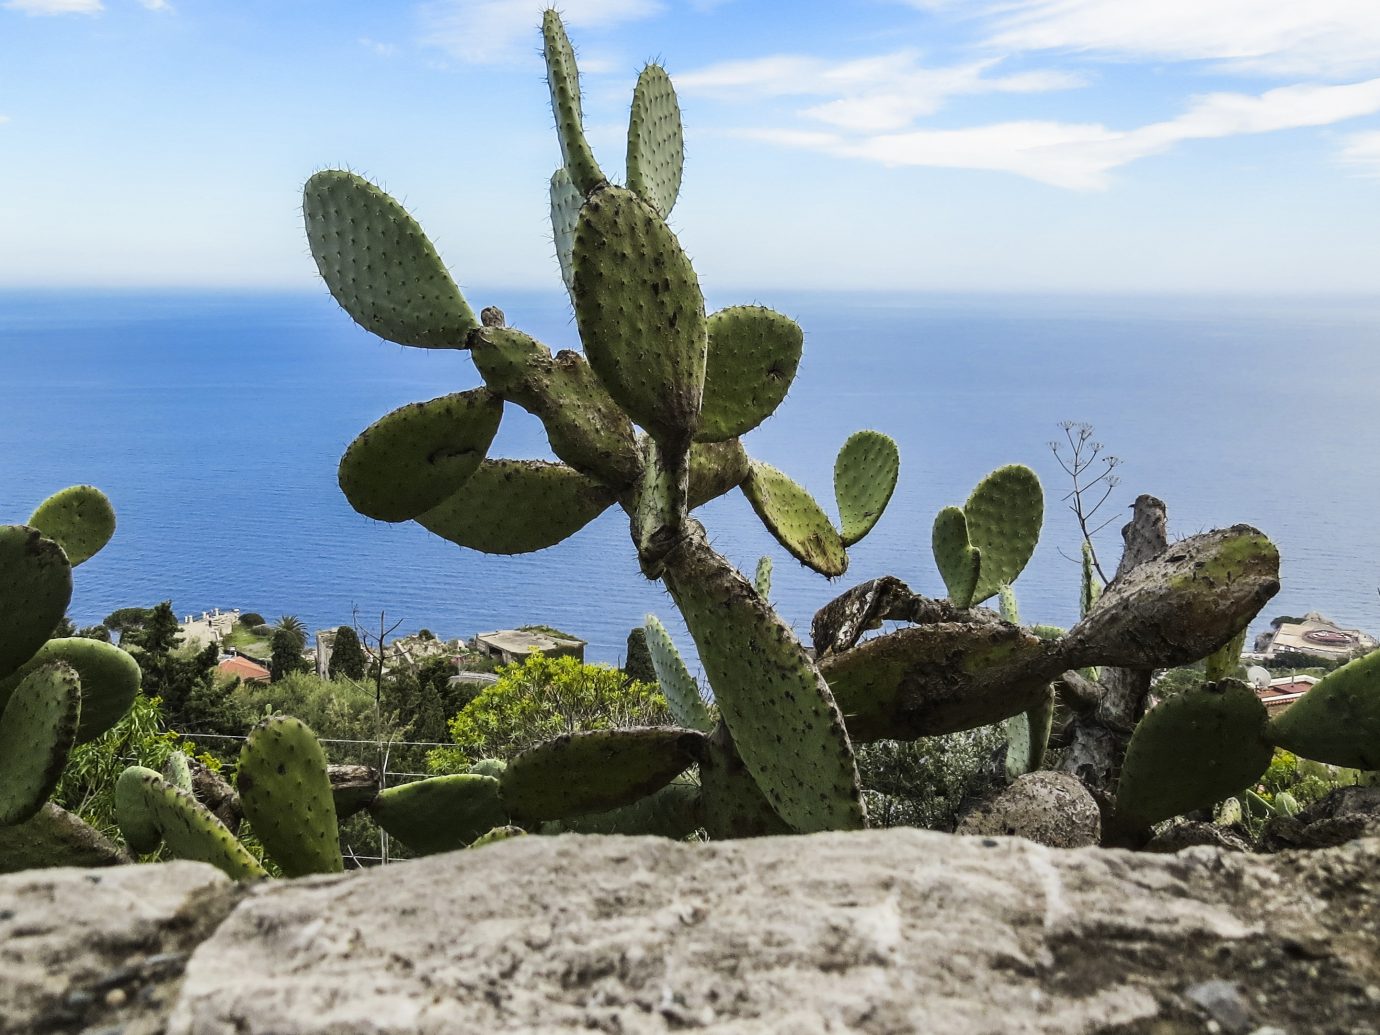 View of cactus and the sea of the coast from the city of Taormina, Sicily, Italy